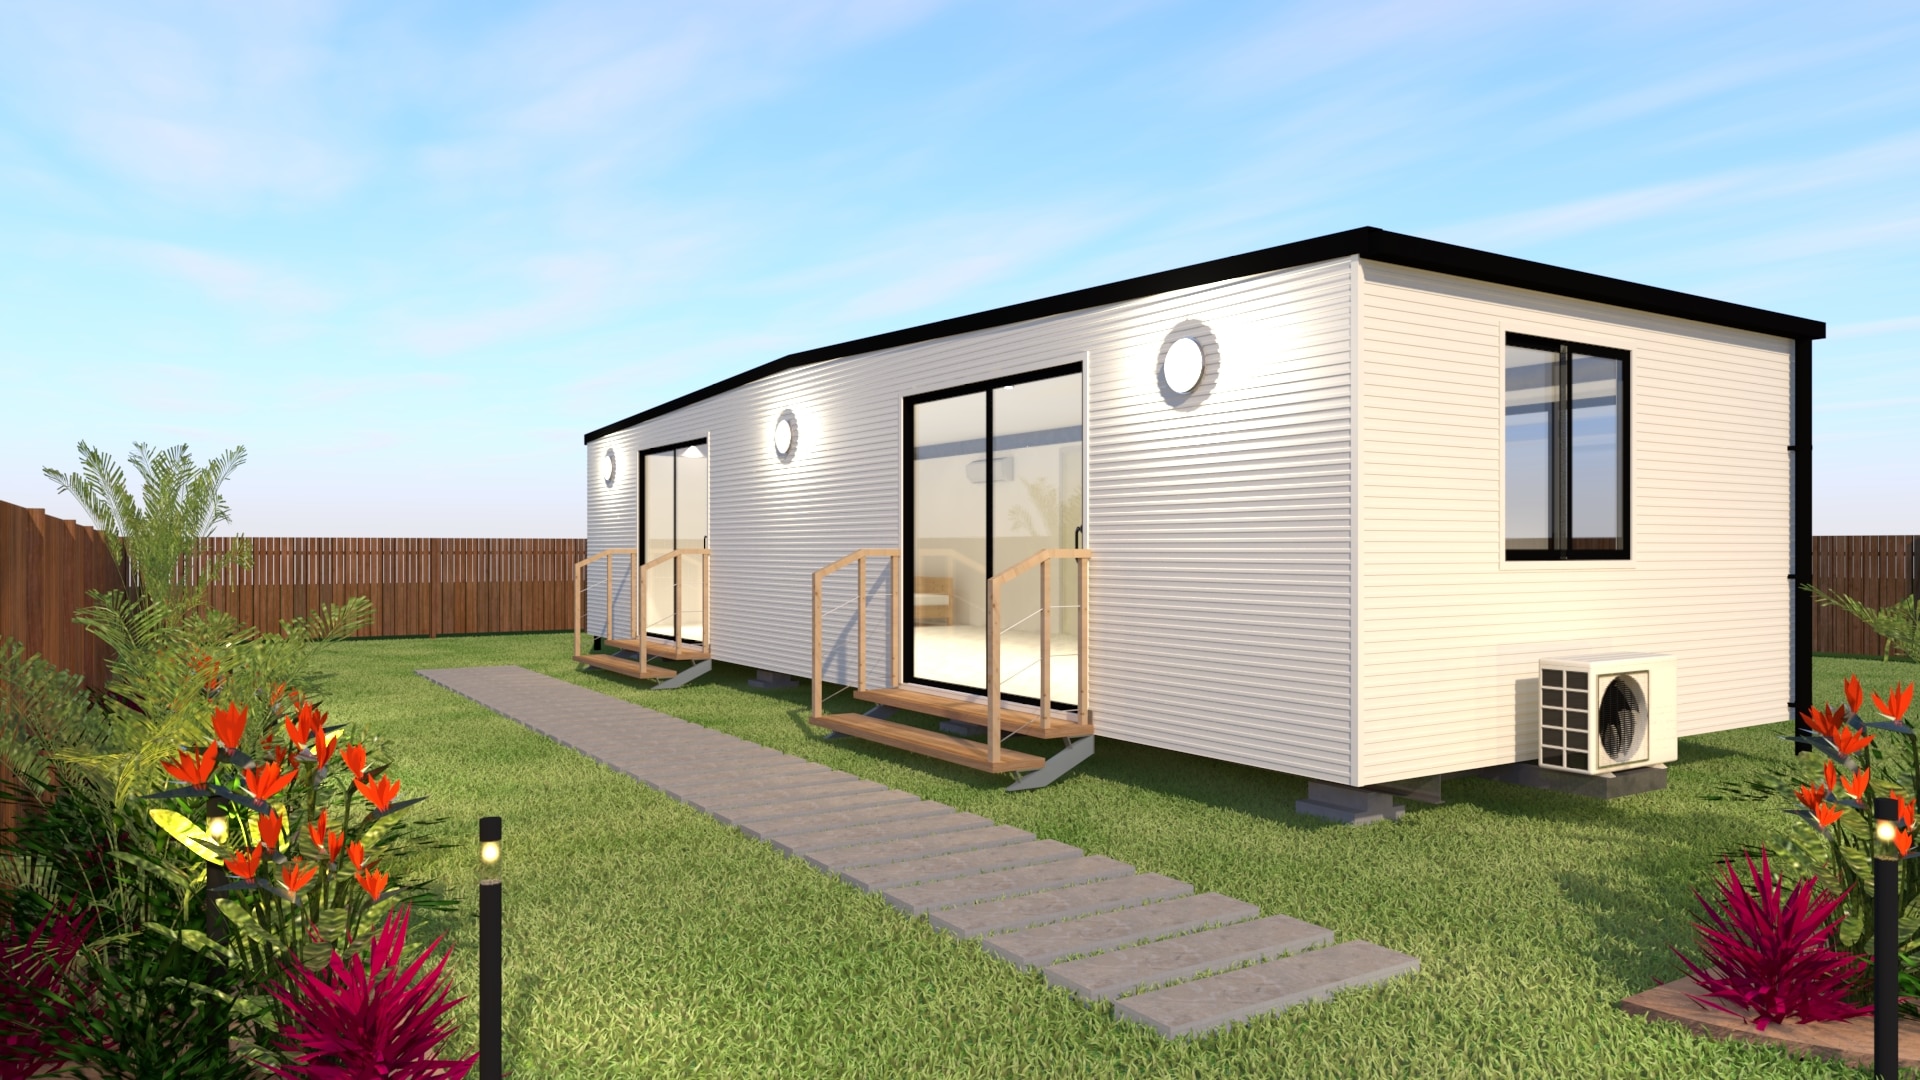 3d render of HOMElife Pods Classic facade with colorbond cladding.